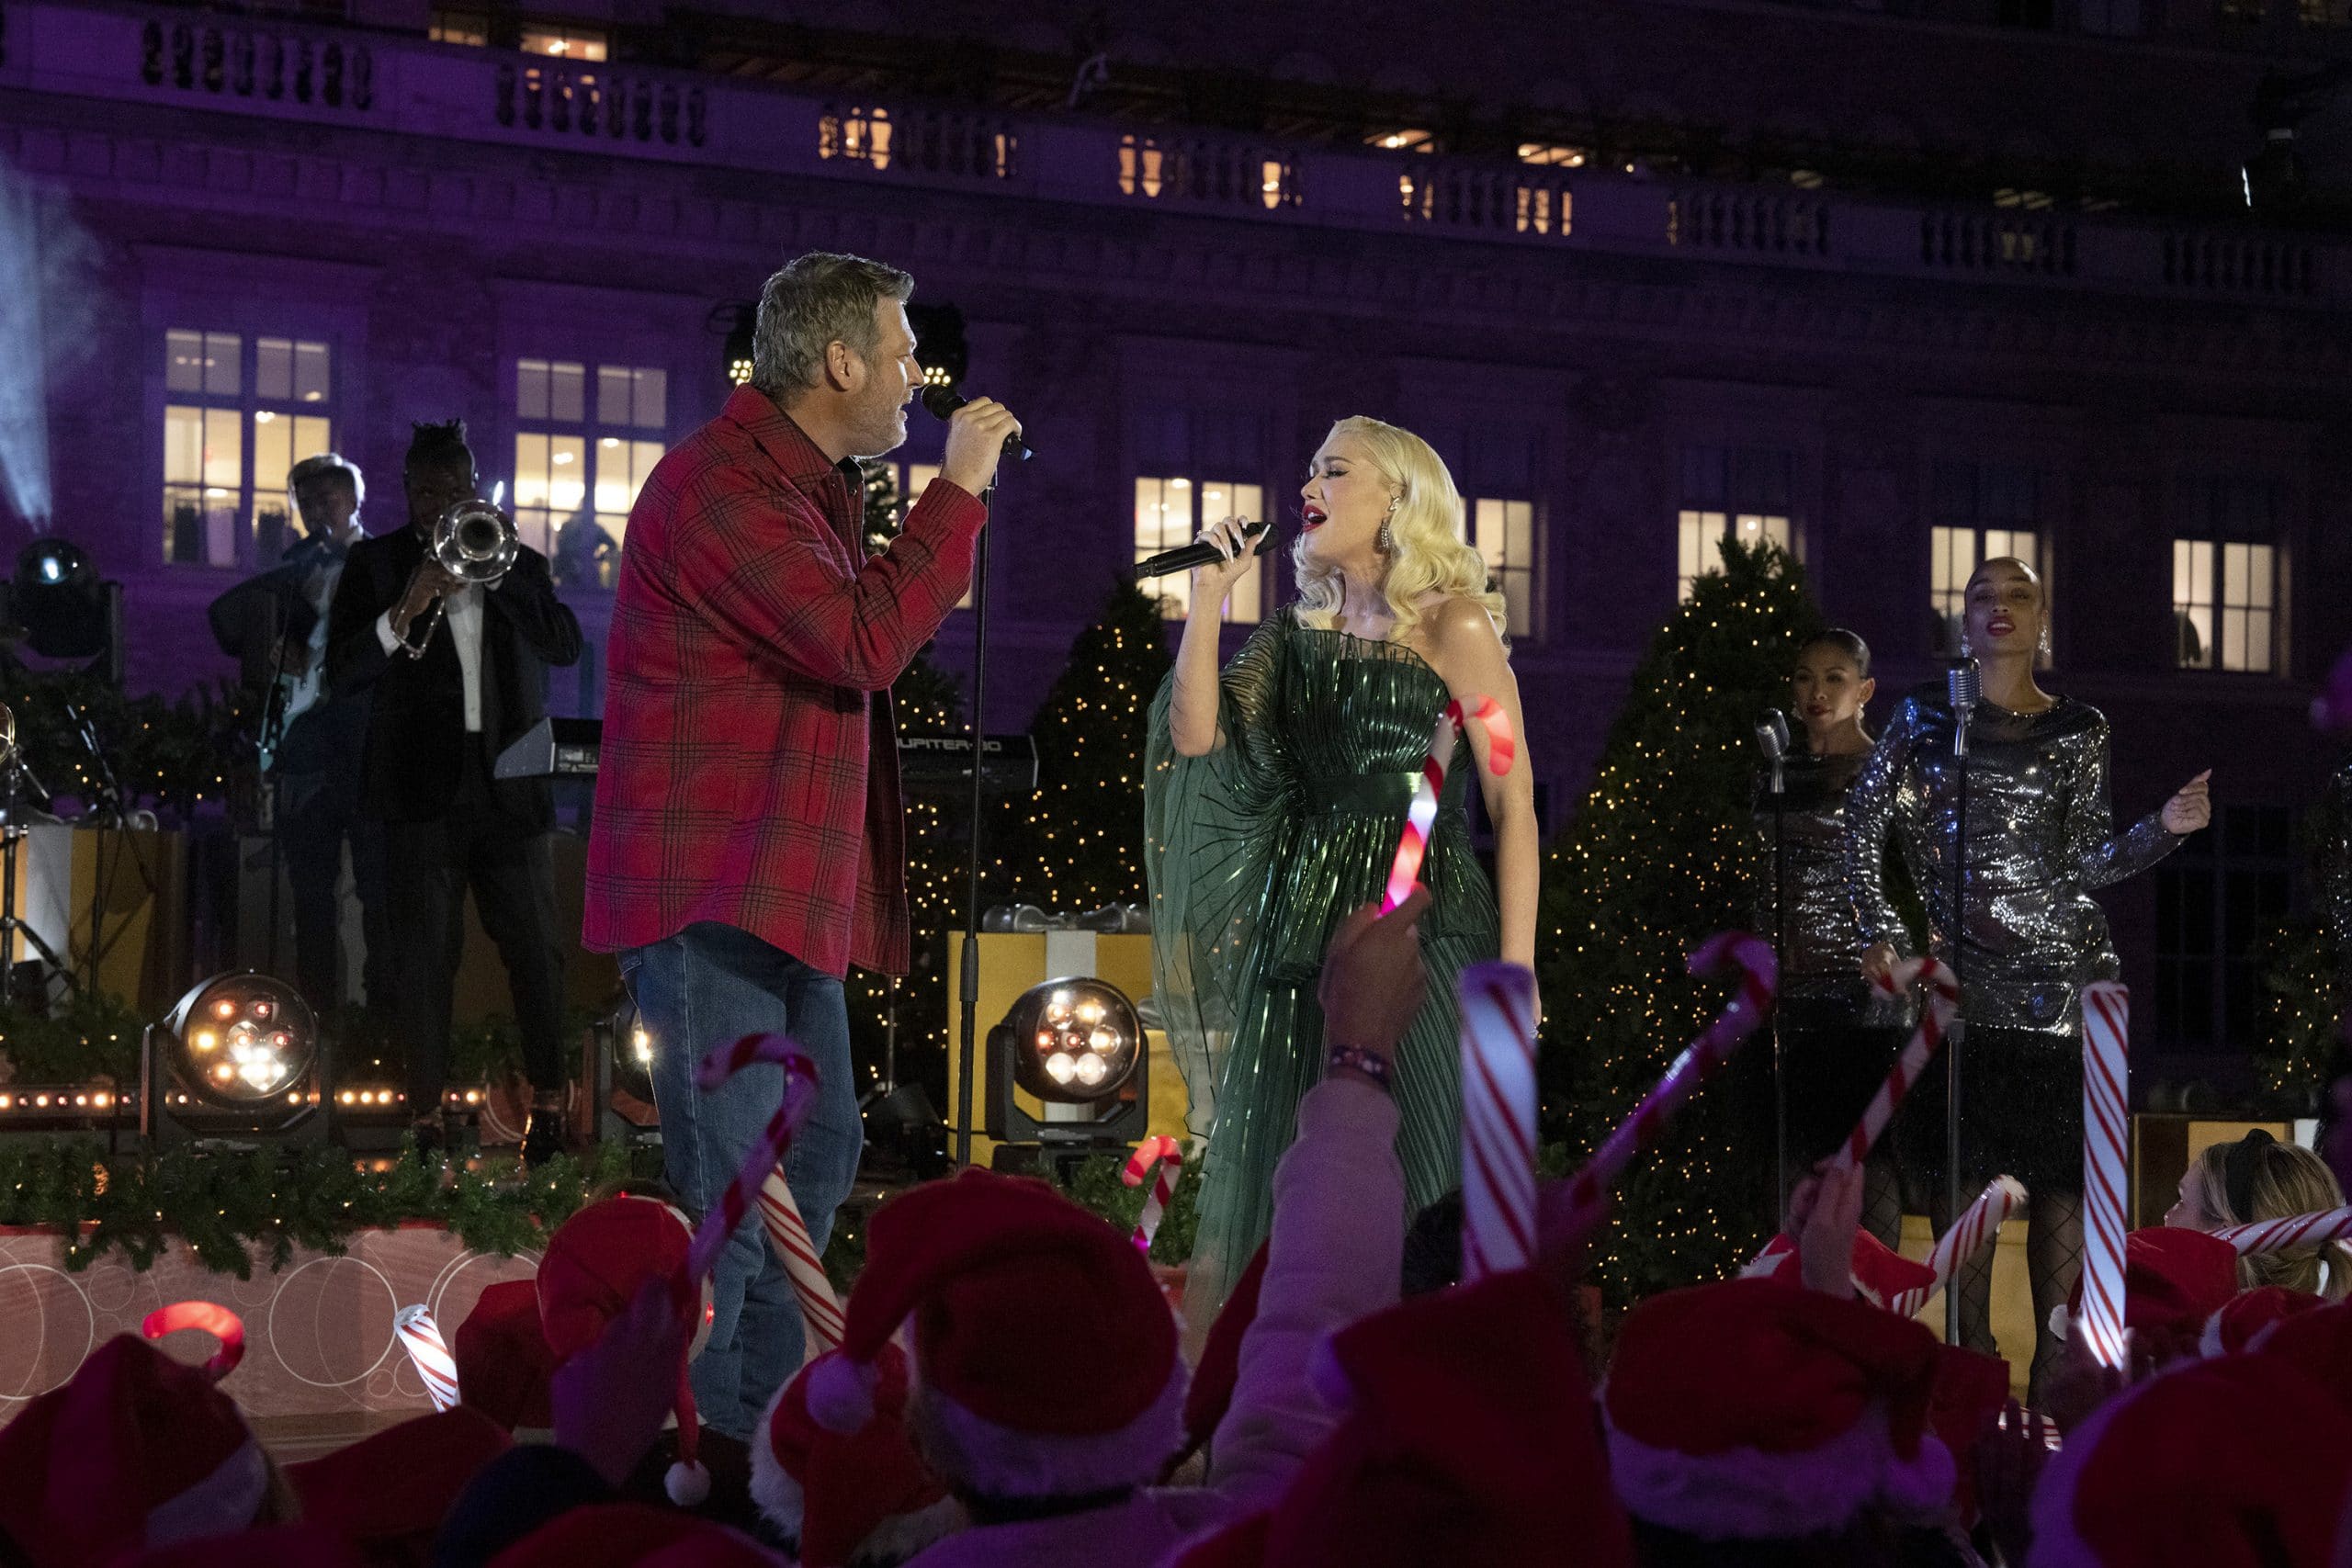 Blake Shelton and Gwen Stefani perform during the "Christmas in Rockefeller Center" special in 2022